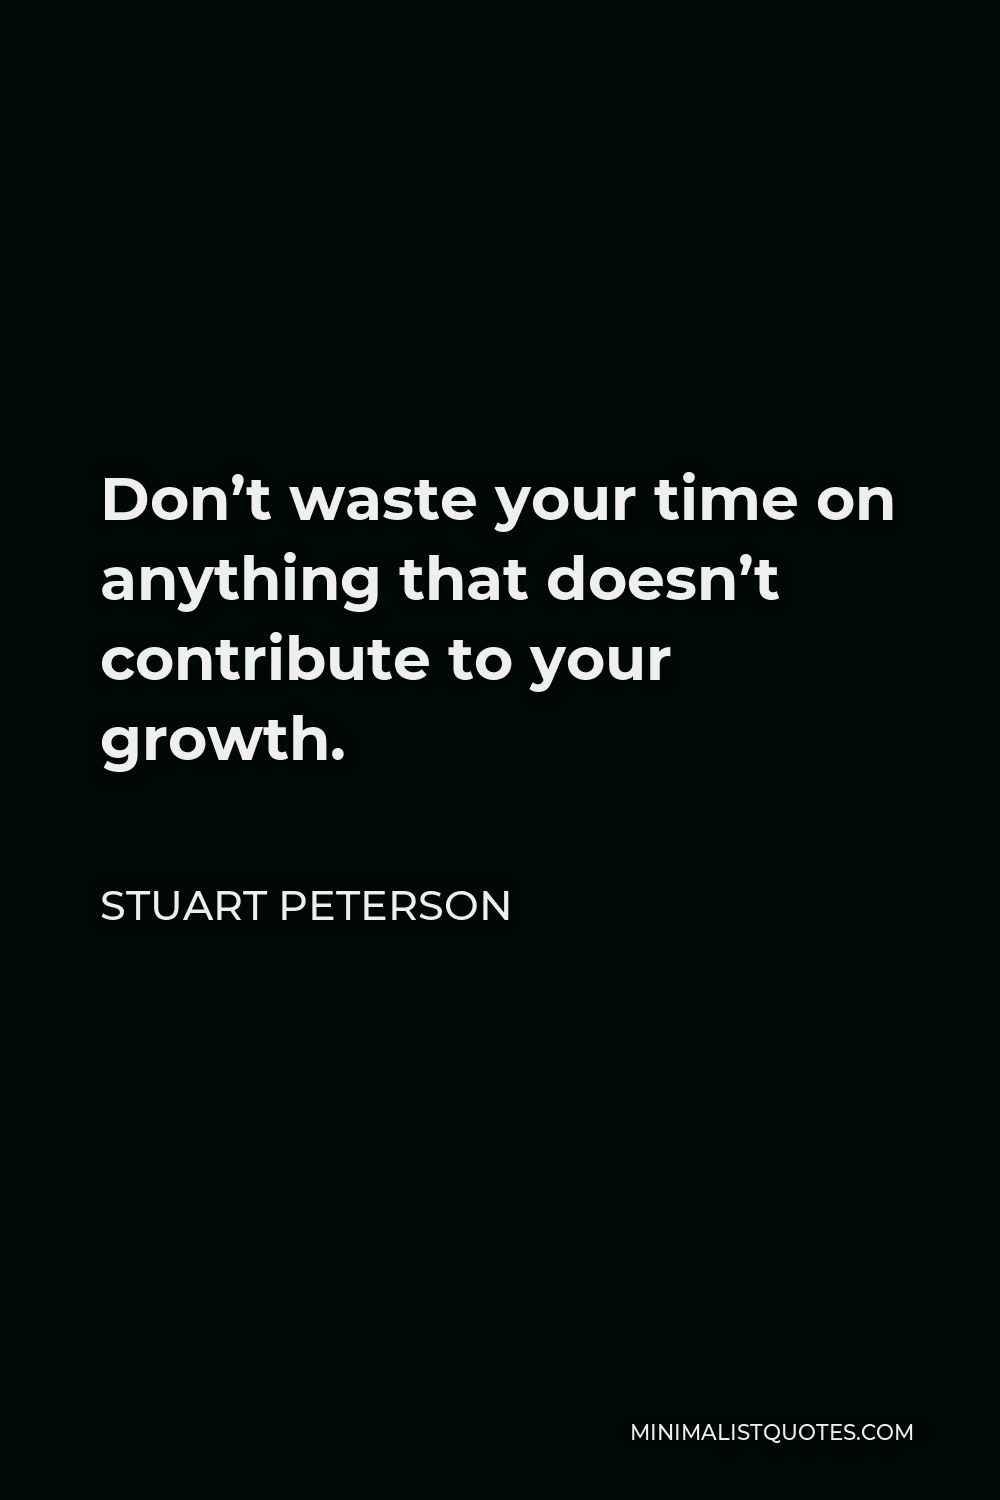 Stuart Peterson Quote - Don’t waste your time on anything that doesn’t contribute to your growth.